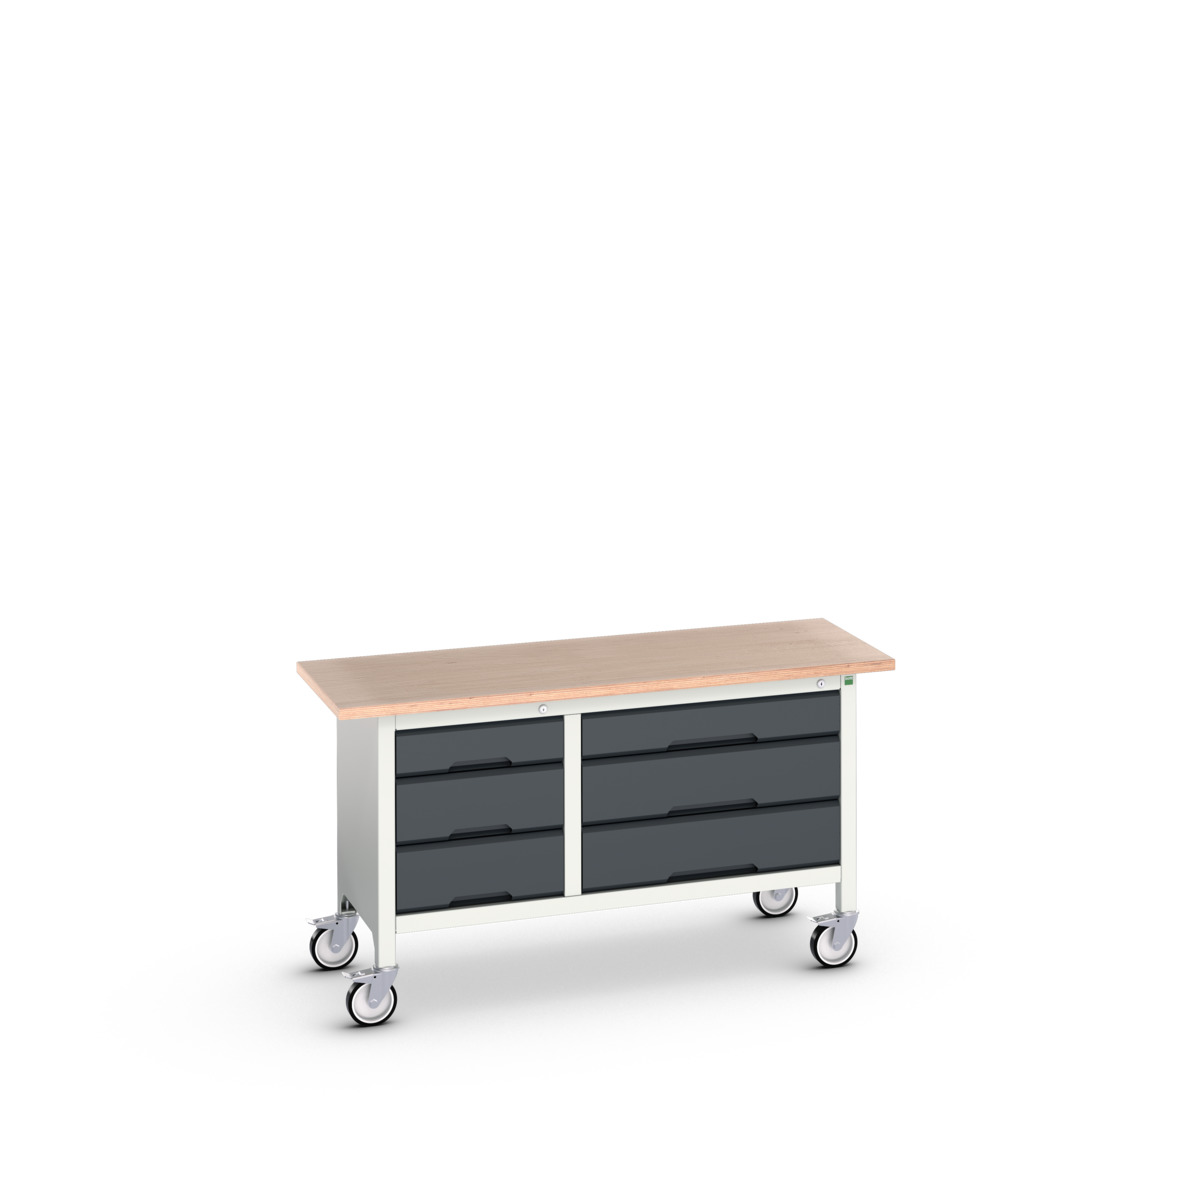 16923215.19 - verso mobile storage bench (mpx)